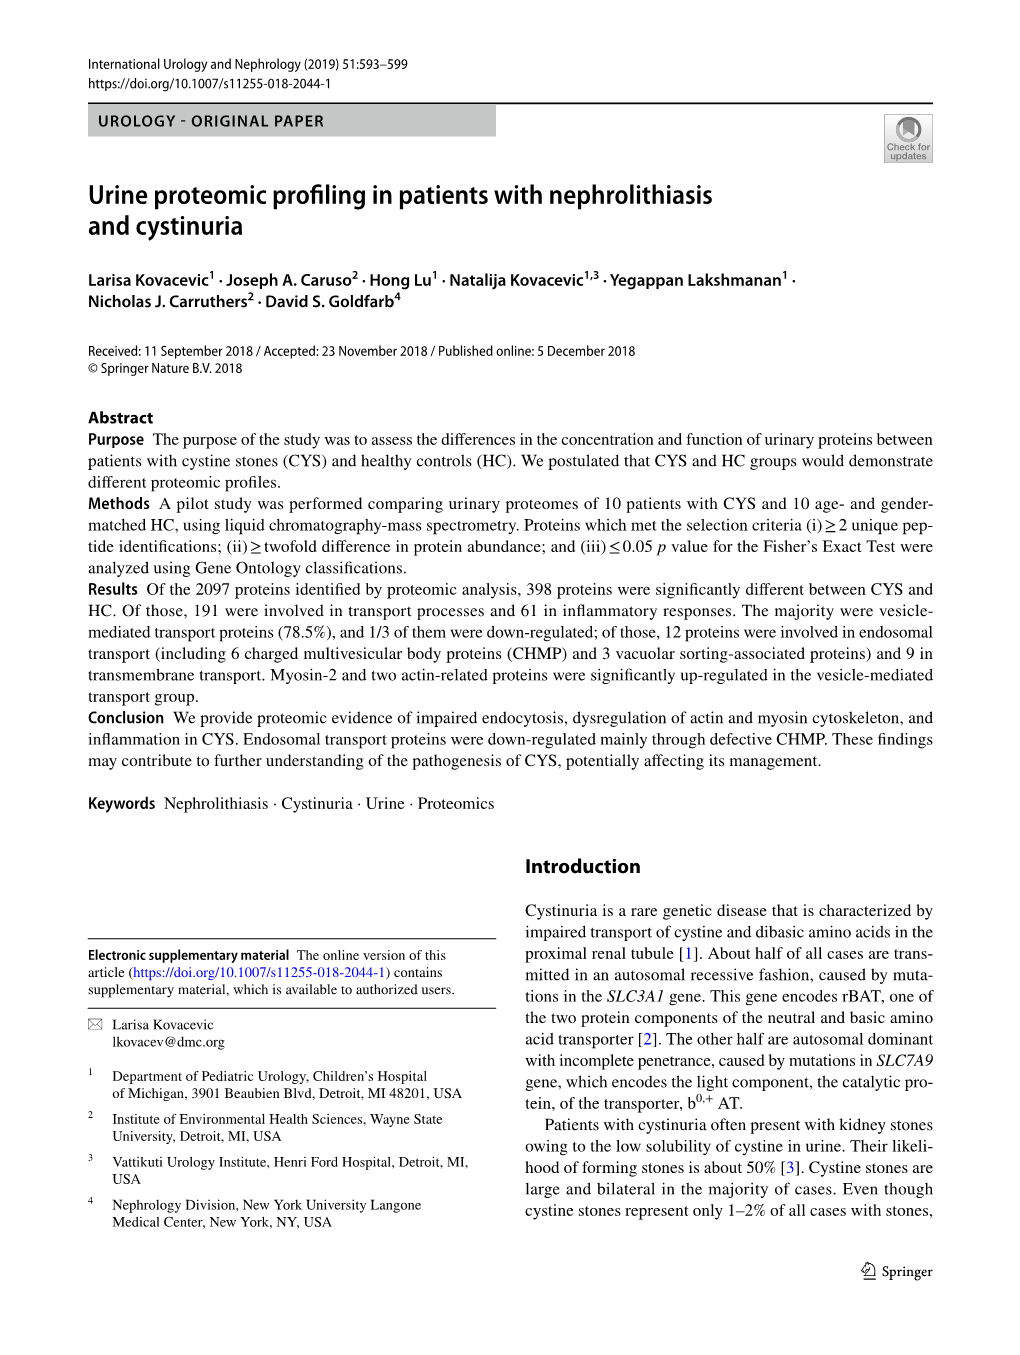 Urine Proteomic Profiling in Patients with Nephrolithiasis and Cystinuria